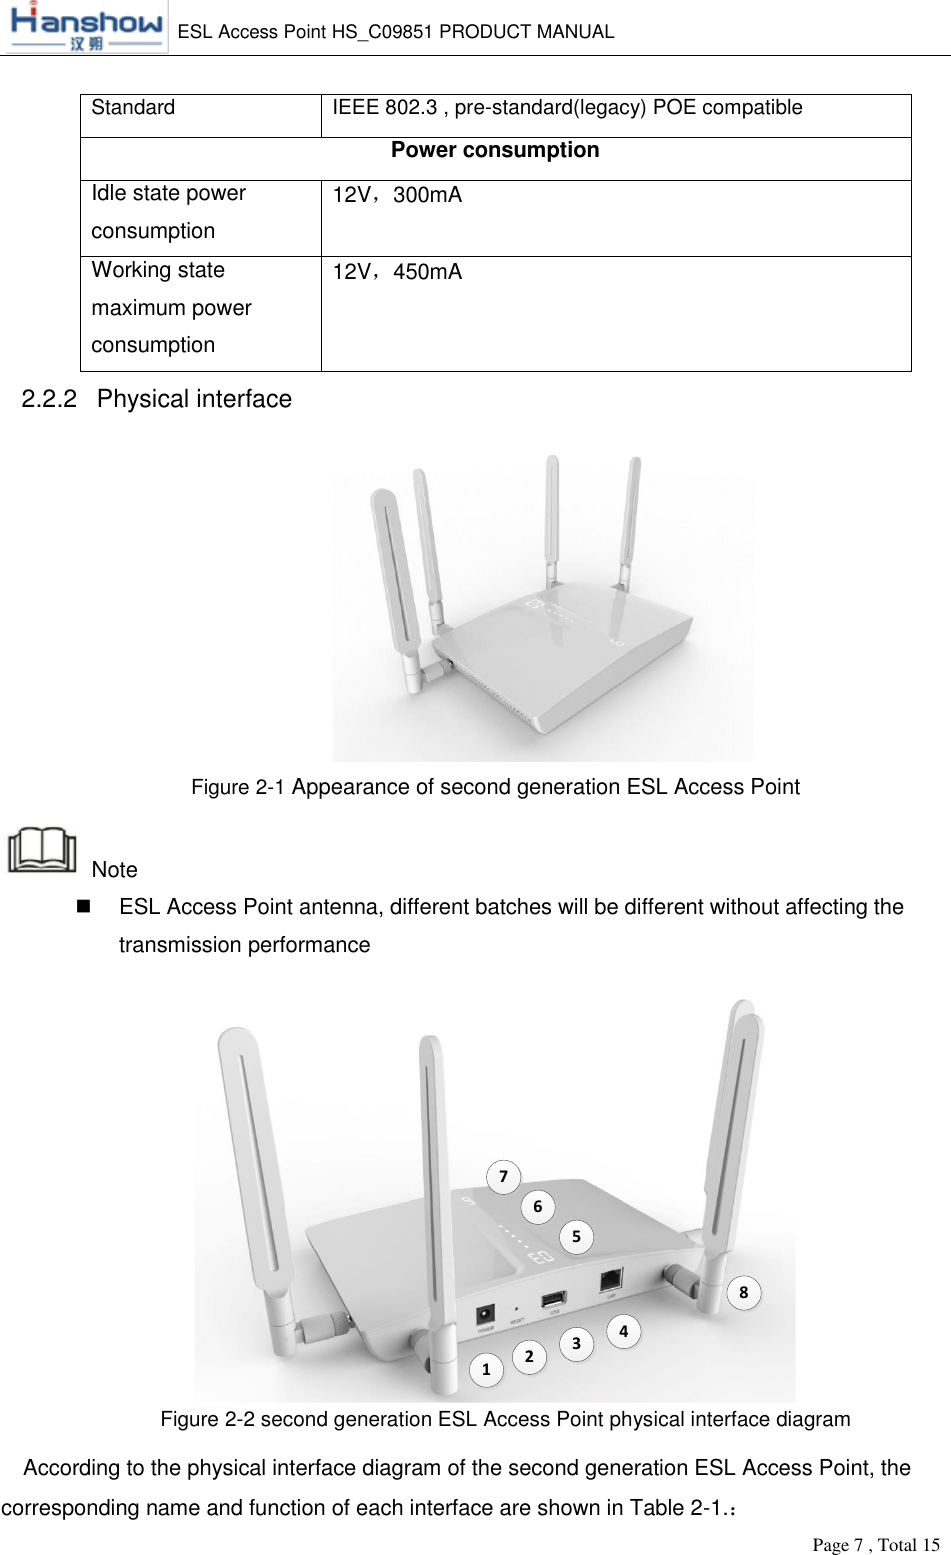    ESL Access Point HS_C09851 PRODUCT MANUAL          Page 7 , Total 15       Standard IEEE 802.3 , pre-standard(legacy) POE compatible Power consumption Idle state power consumption 12V，300mA Working state maximum power consumption 12V，450mA 2.2.2  Physical interface  Figure 2-1 Appearance of second generation ESL Access Point Note   ESL Access Point antenna, different batches will be different without affecting the transmission performance  12457683 Figure 2-2 second generation ESL Access Point physical interface diagram According to the physical interface diagram of the second generation ESL Access Point, the corresponding name and function of each interface are shown in Table 2-1.： 